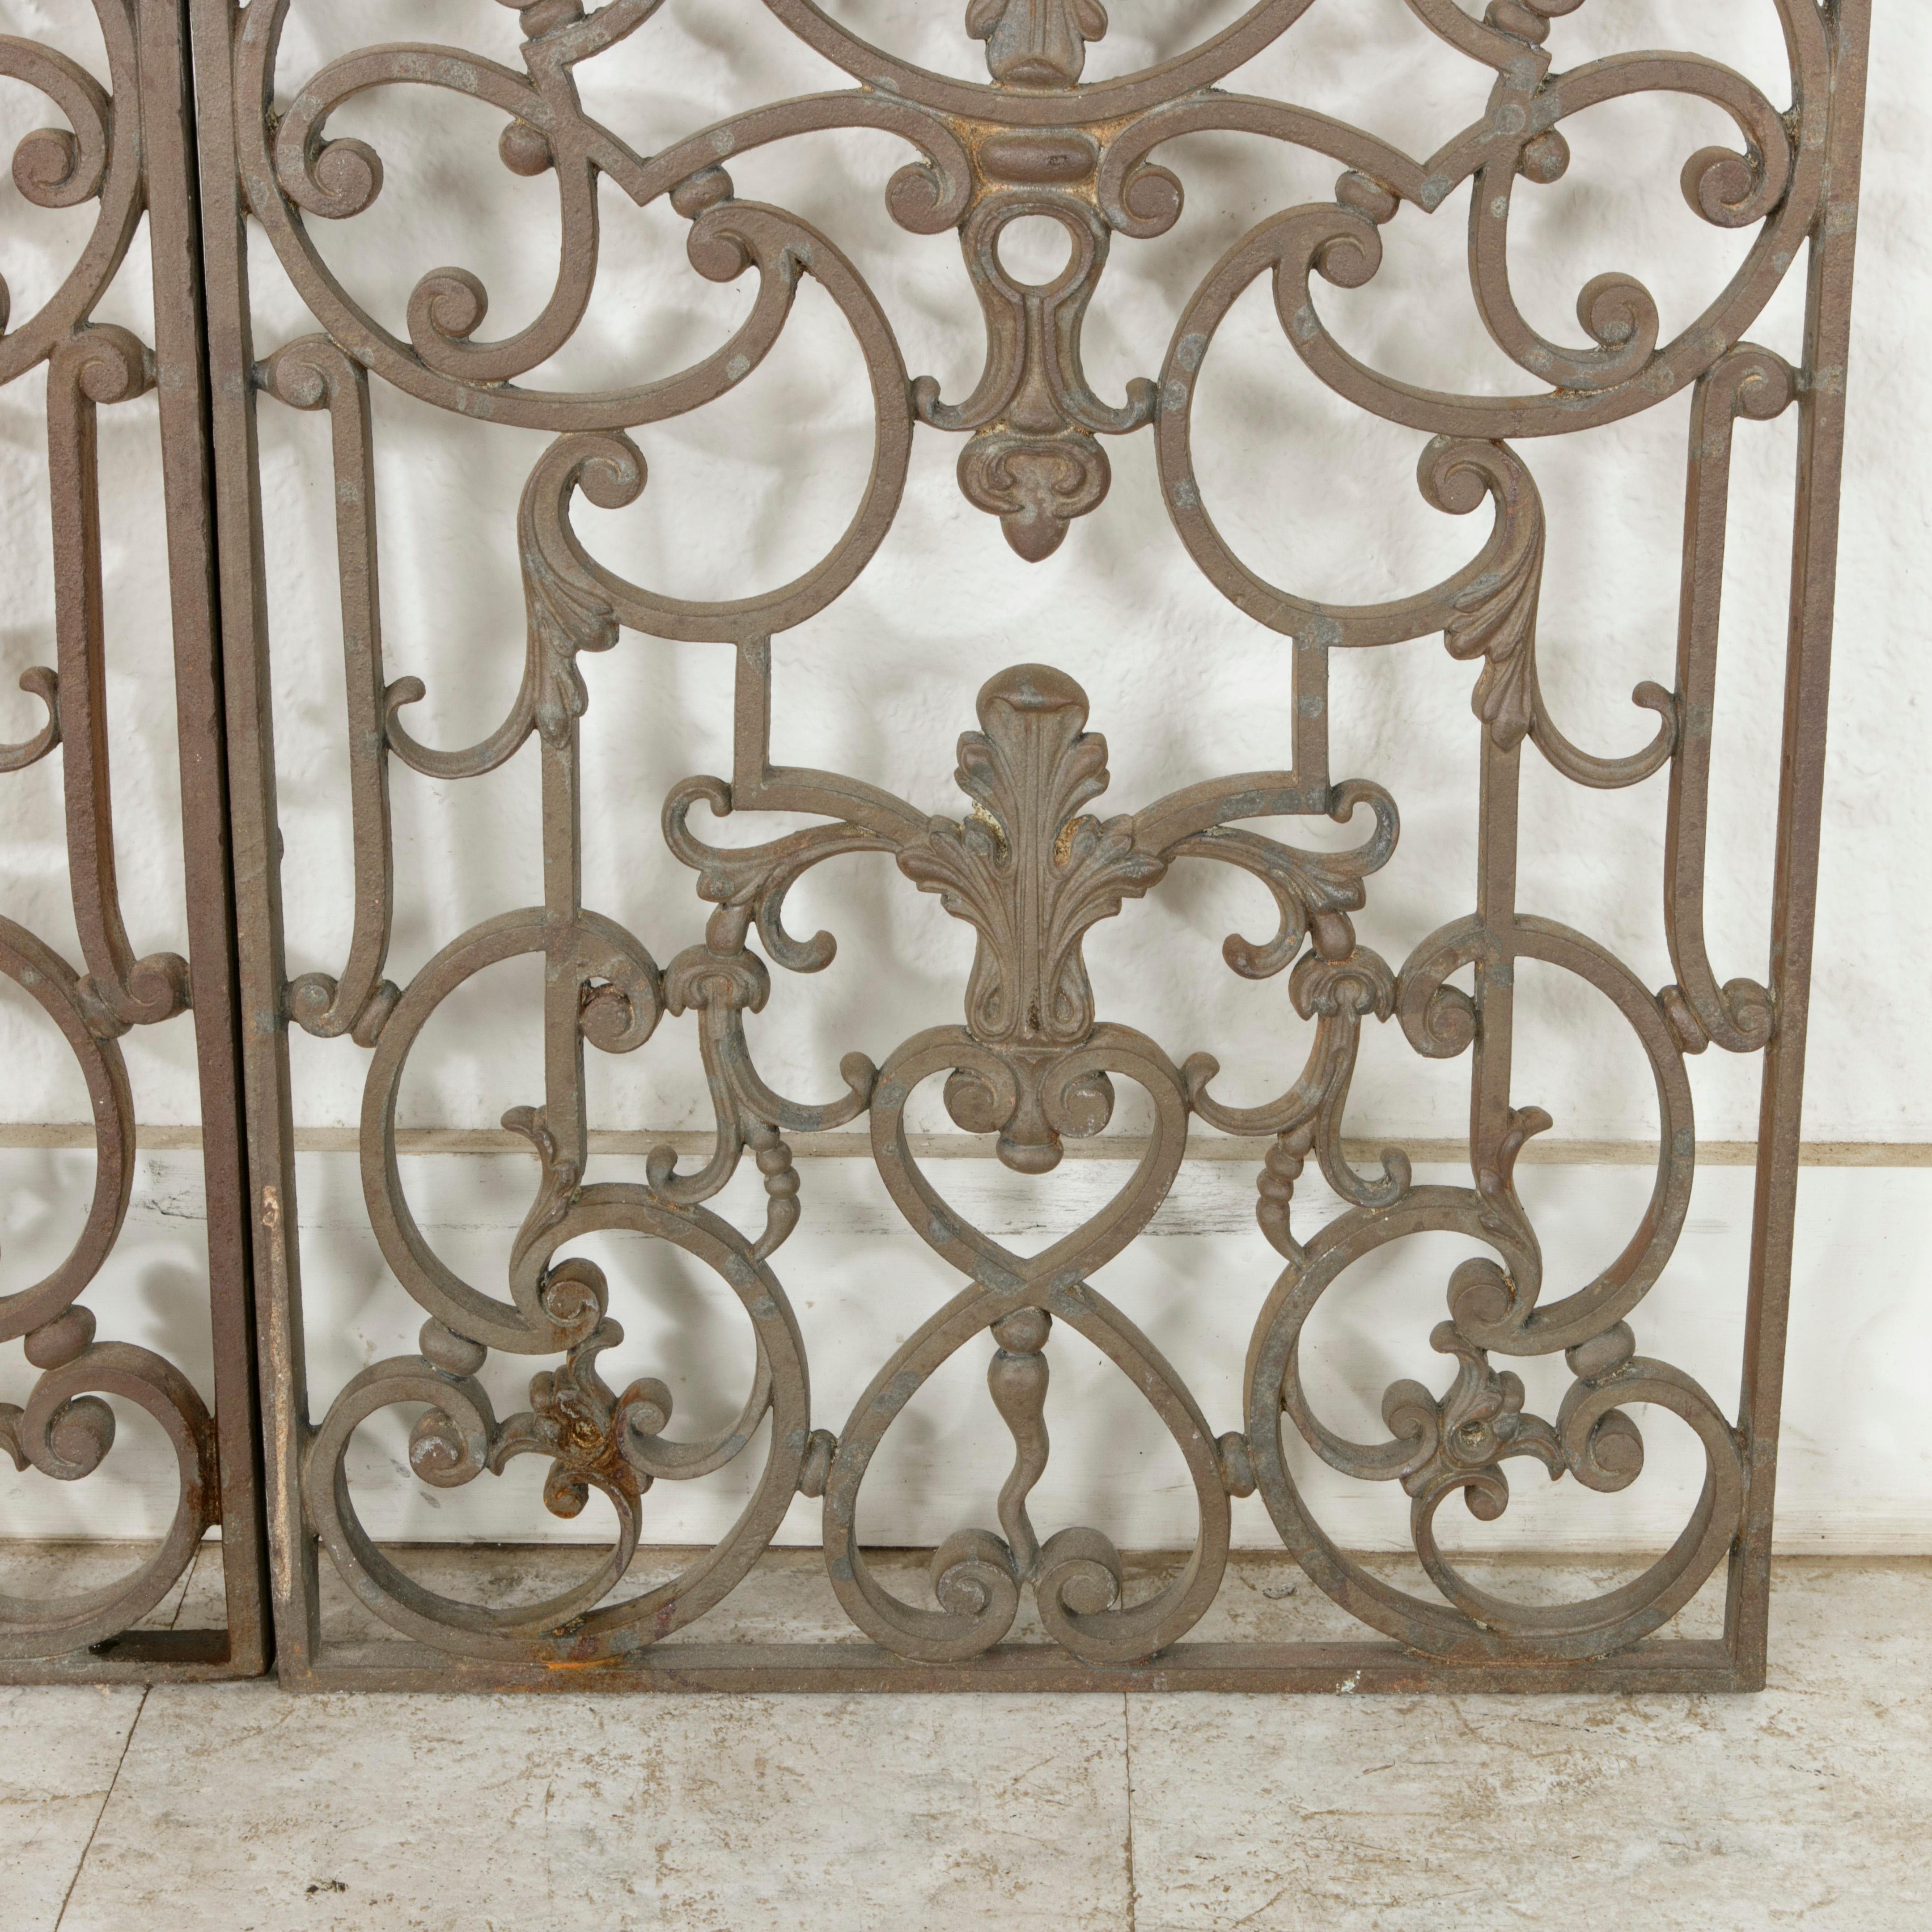 Pair of Early 20th Century French Iron Gates with Symmetrical Design 4